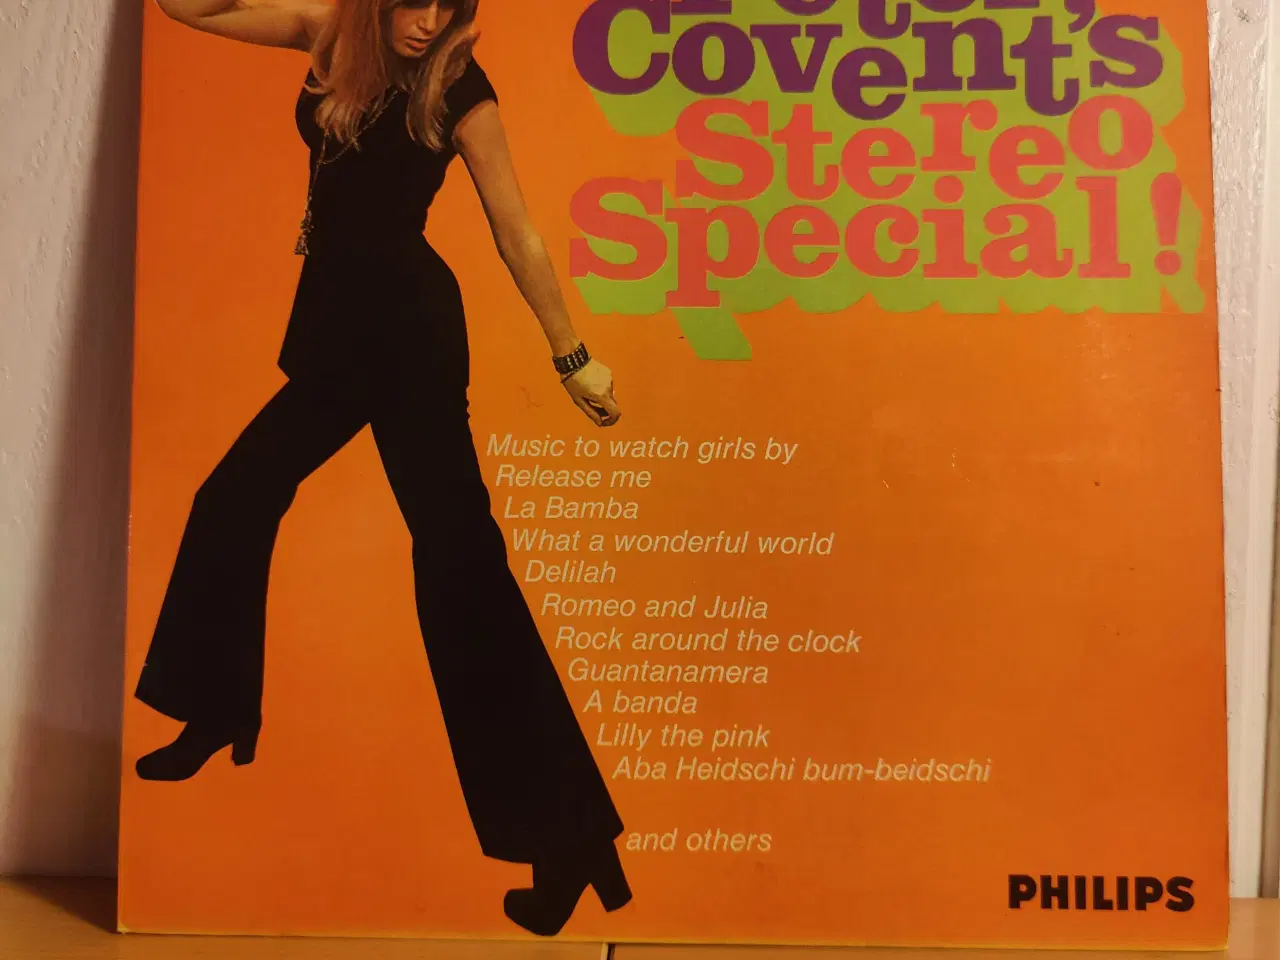 Billede 1 - Peter Covents Stereo Special LP